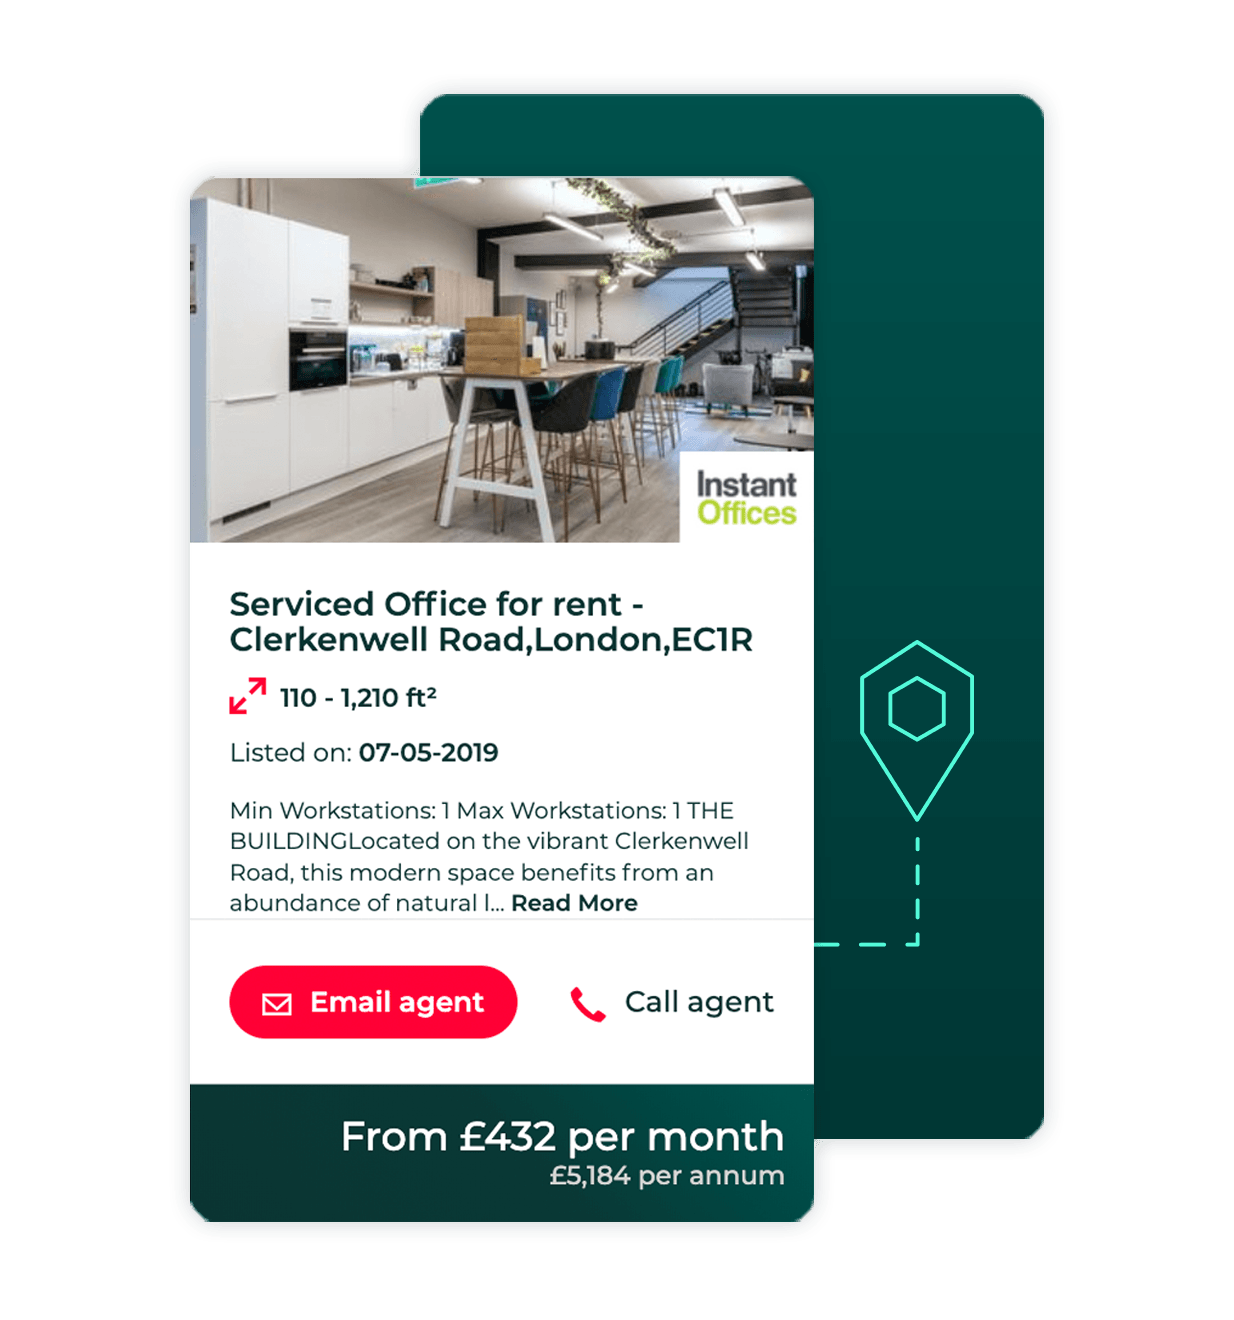 Commercial People real estate platform in the UK case study